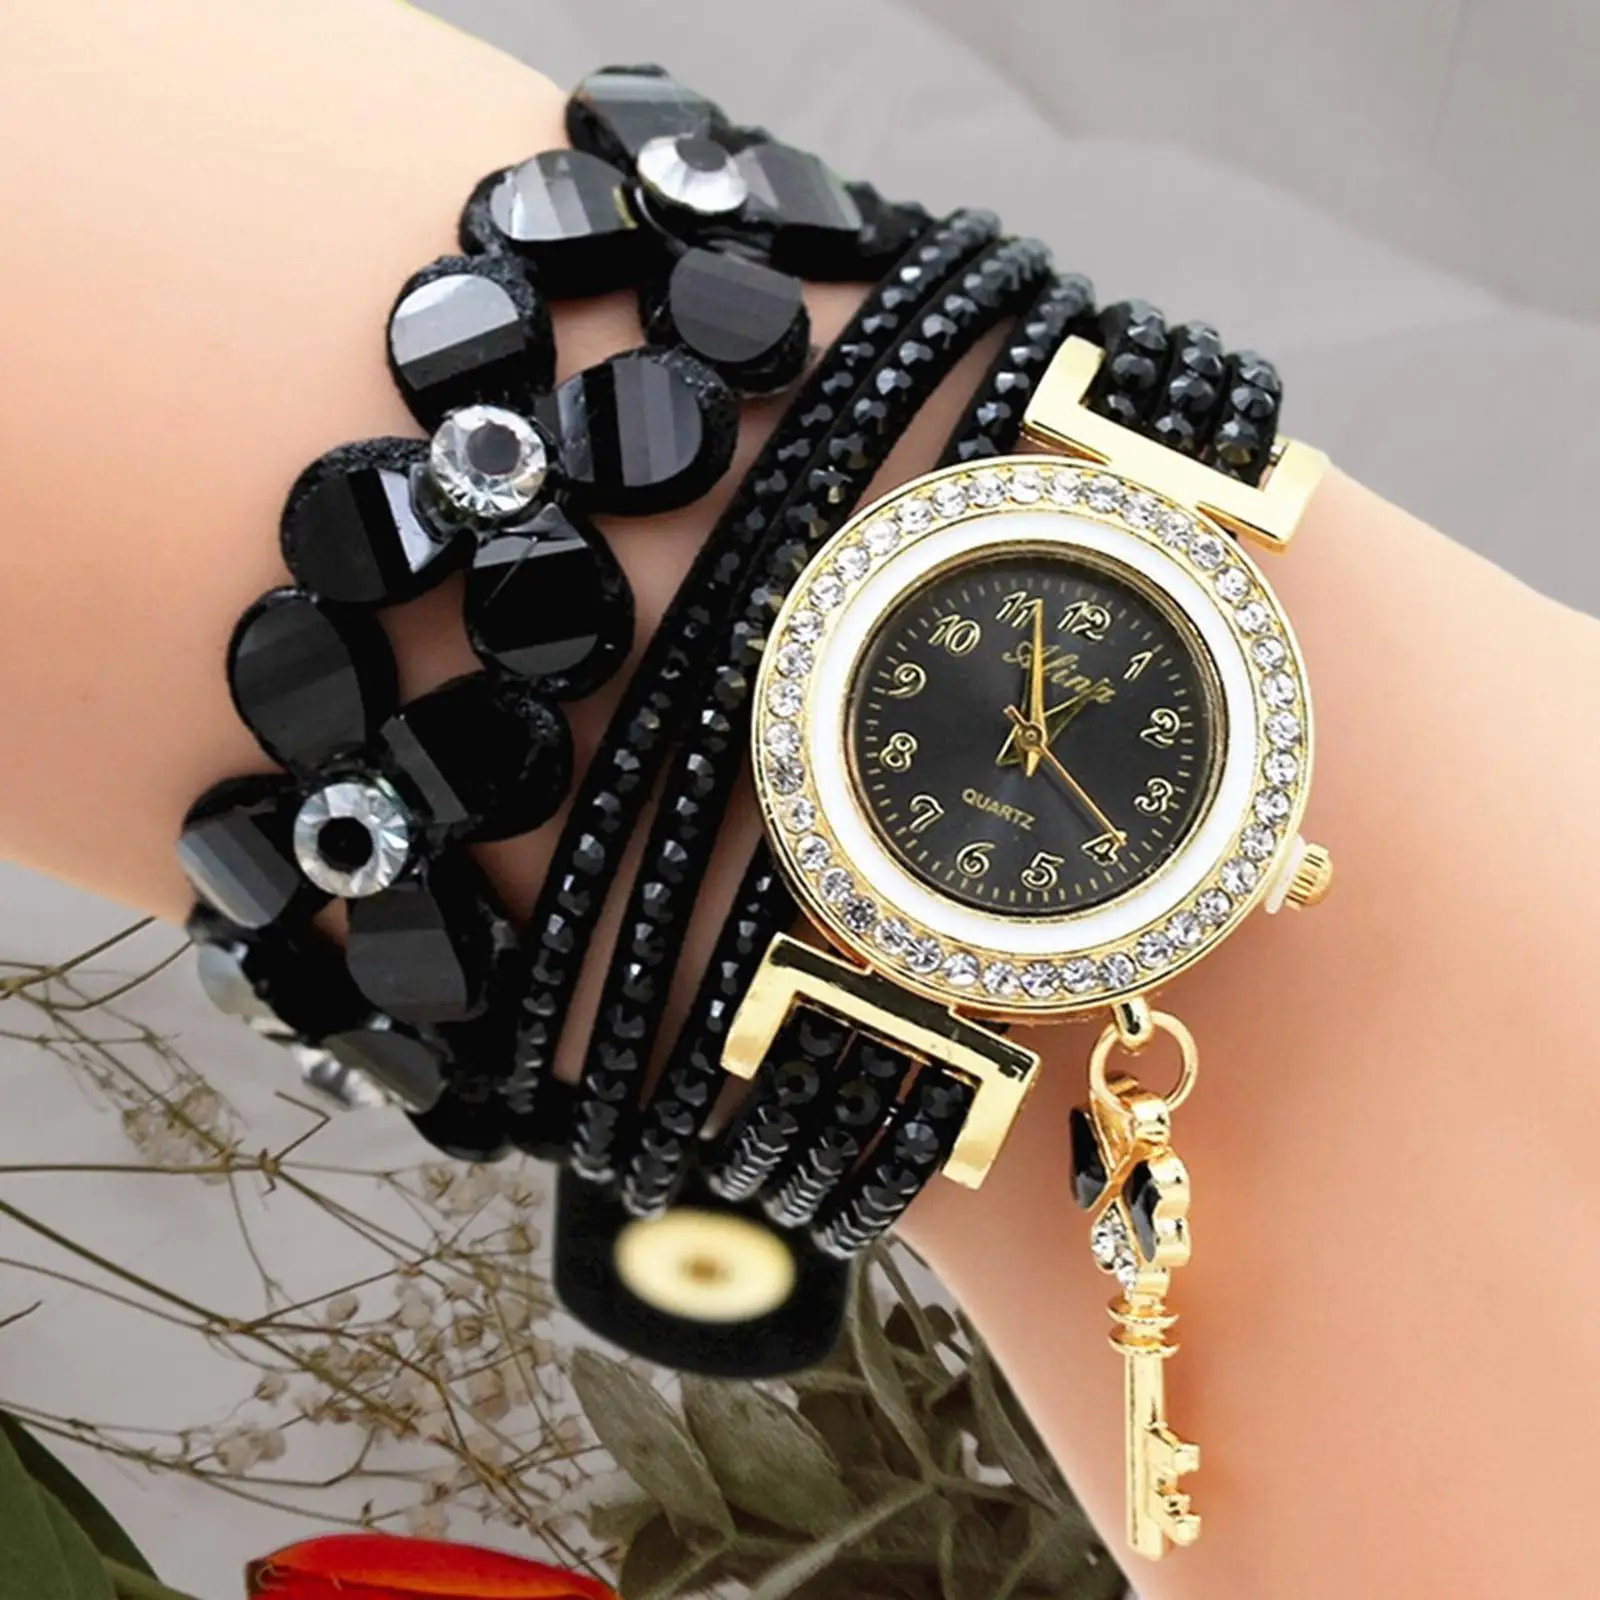 Bracelet Watch Women Decorative Versatile Portable Wrist Watch for Camping Shopping Fishing Outdoor Activities Birthday Gift